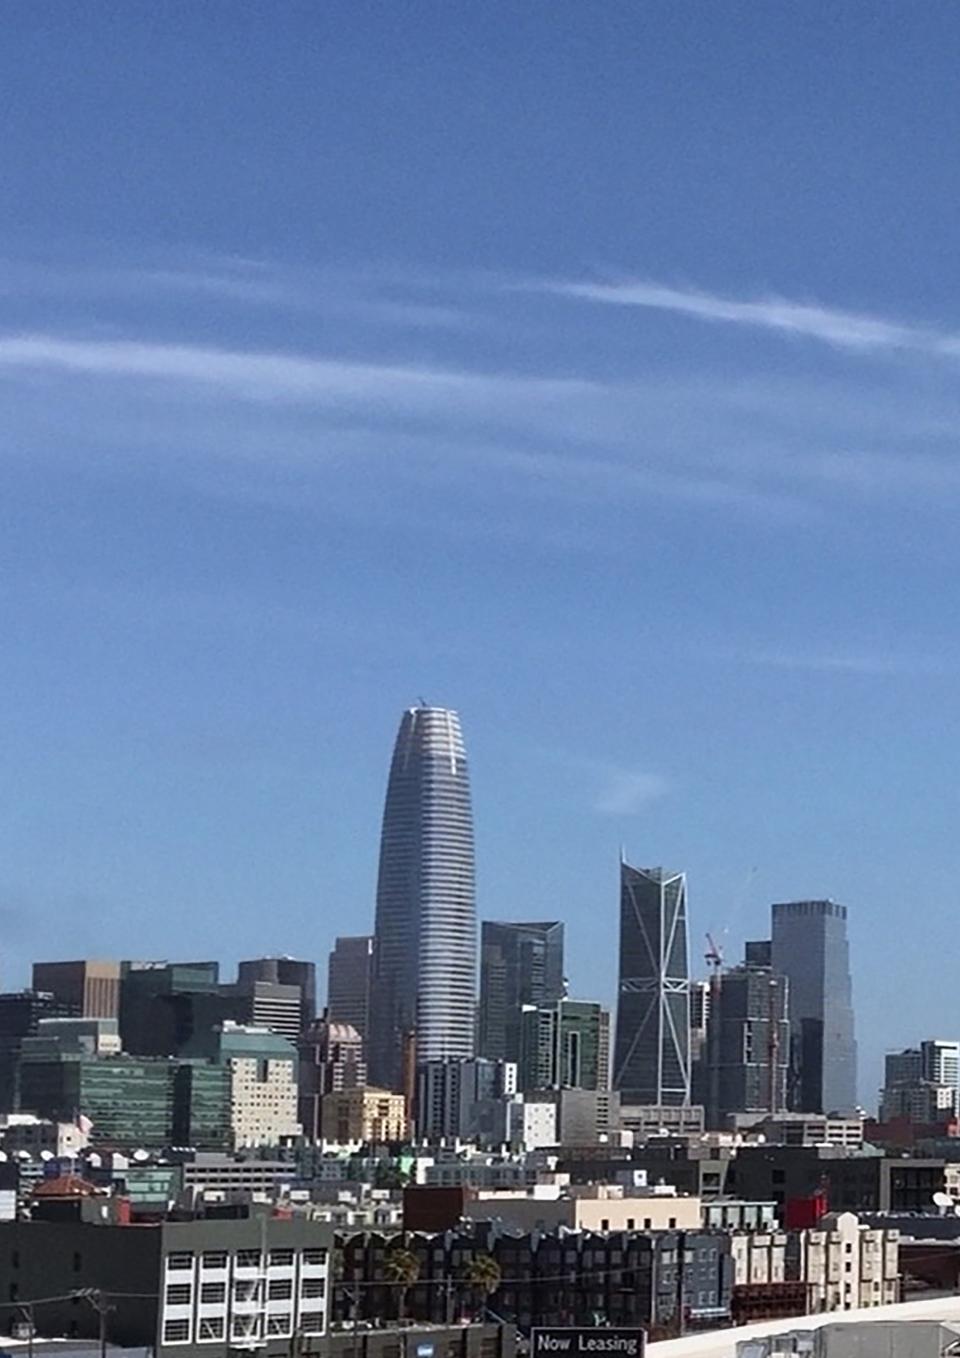 San Francisco skyline with many tall buildings in the background and warehouses in the foreground. In the center is the gigantic Salesforce building, at least a third taller than the tallest of the others, with a curving shape that tapers toward the top. A blue sky with a streak of white clouds takes up most of the frame.